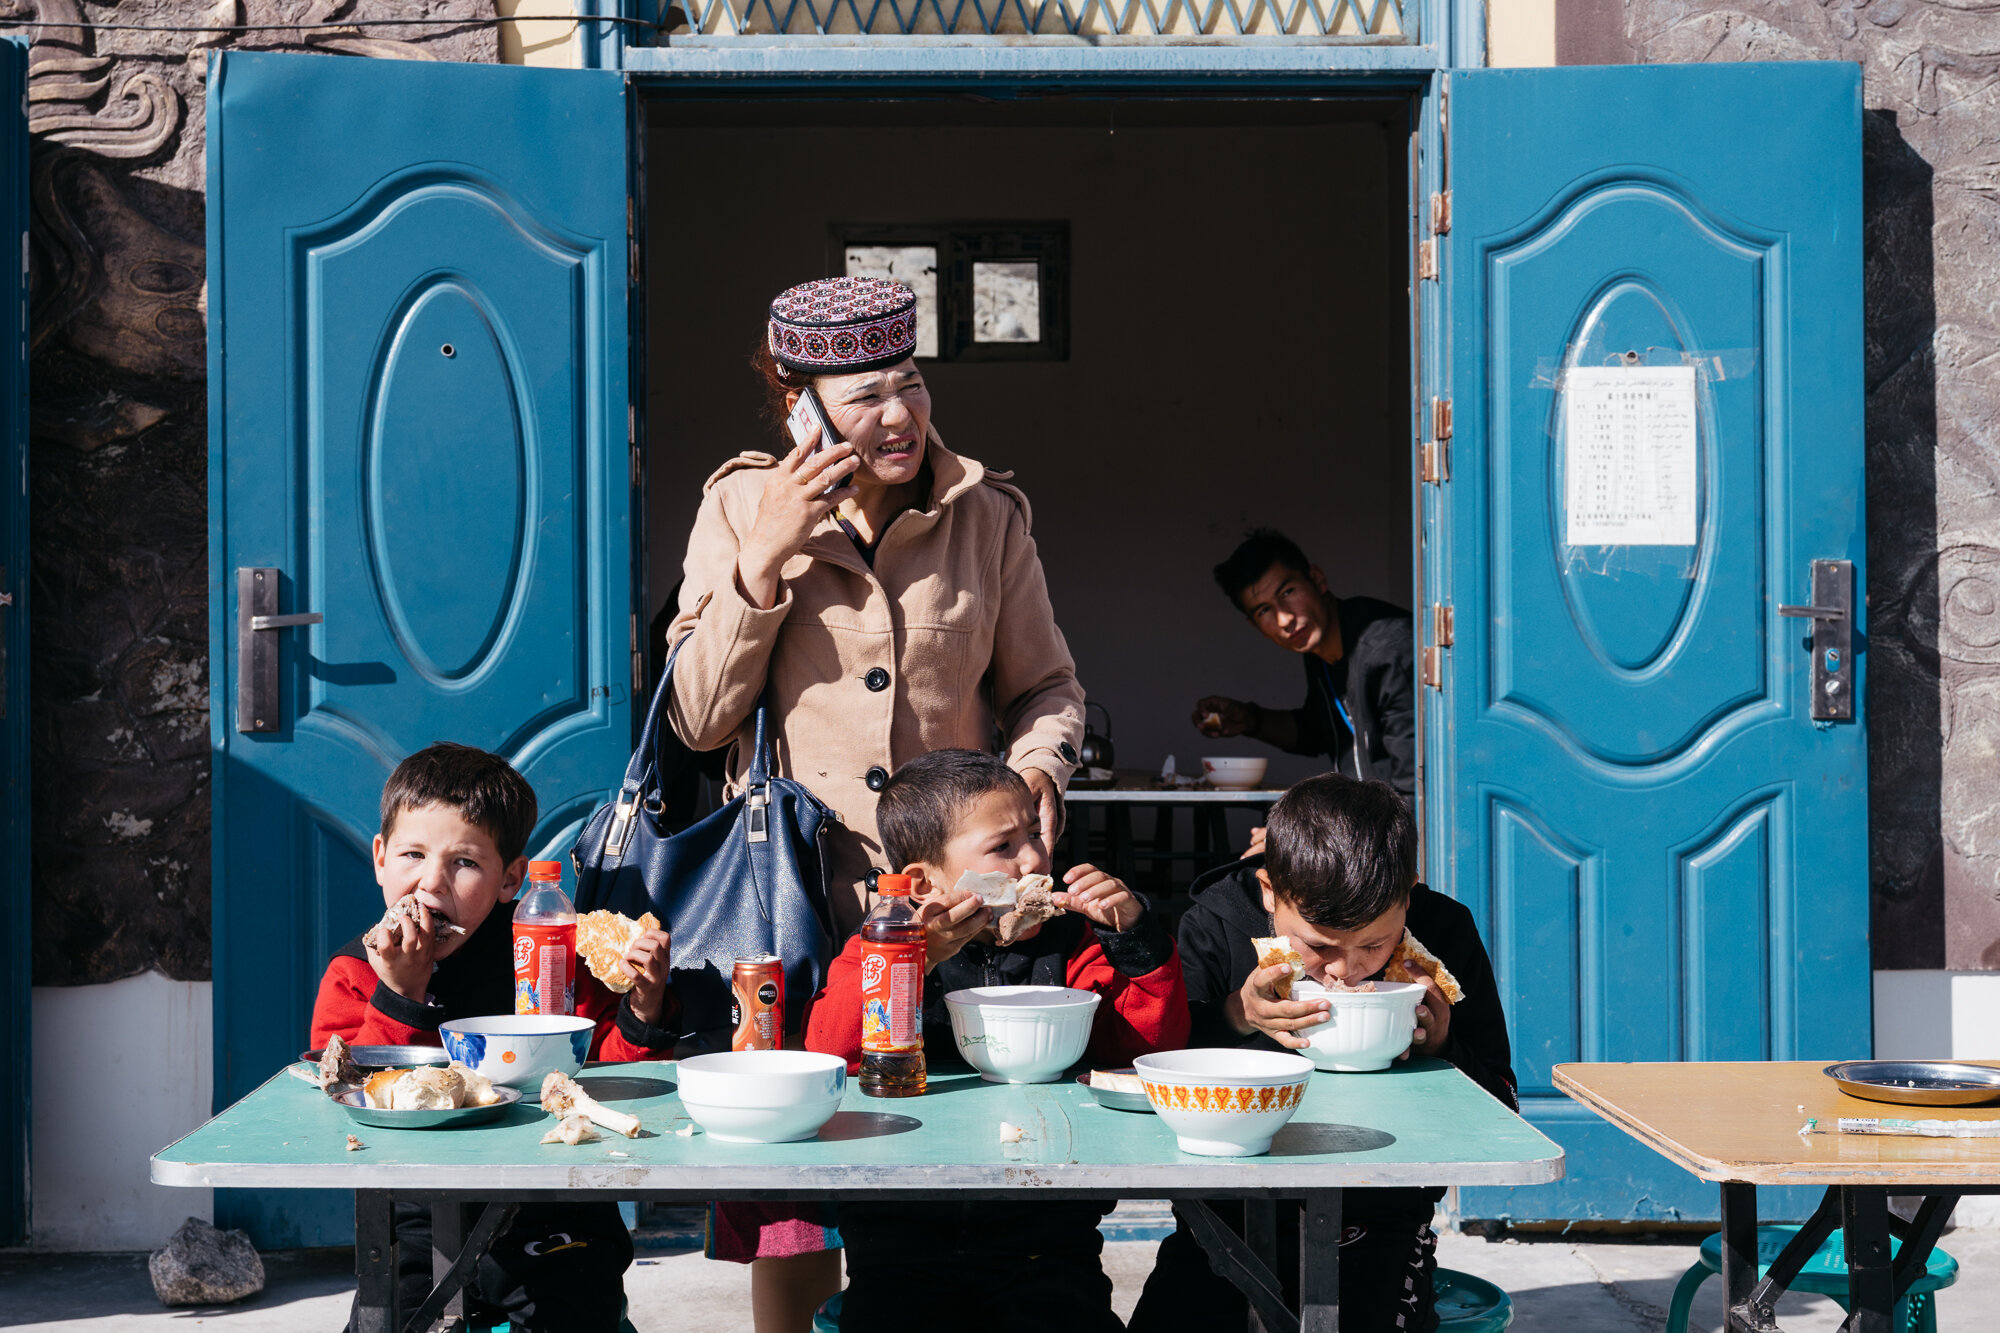  Pit-stop on the road to Kashgar. Most of the inhabitants of western Xinjiang province part of an Turkic minority ethnic group originating from and culturally affiliated with the general region of Central and East Asia. This lady is wearing a traditi